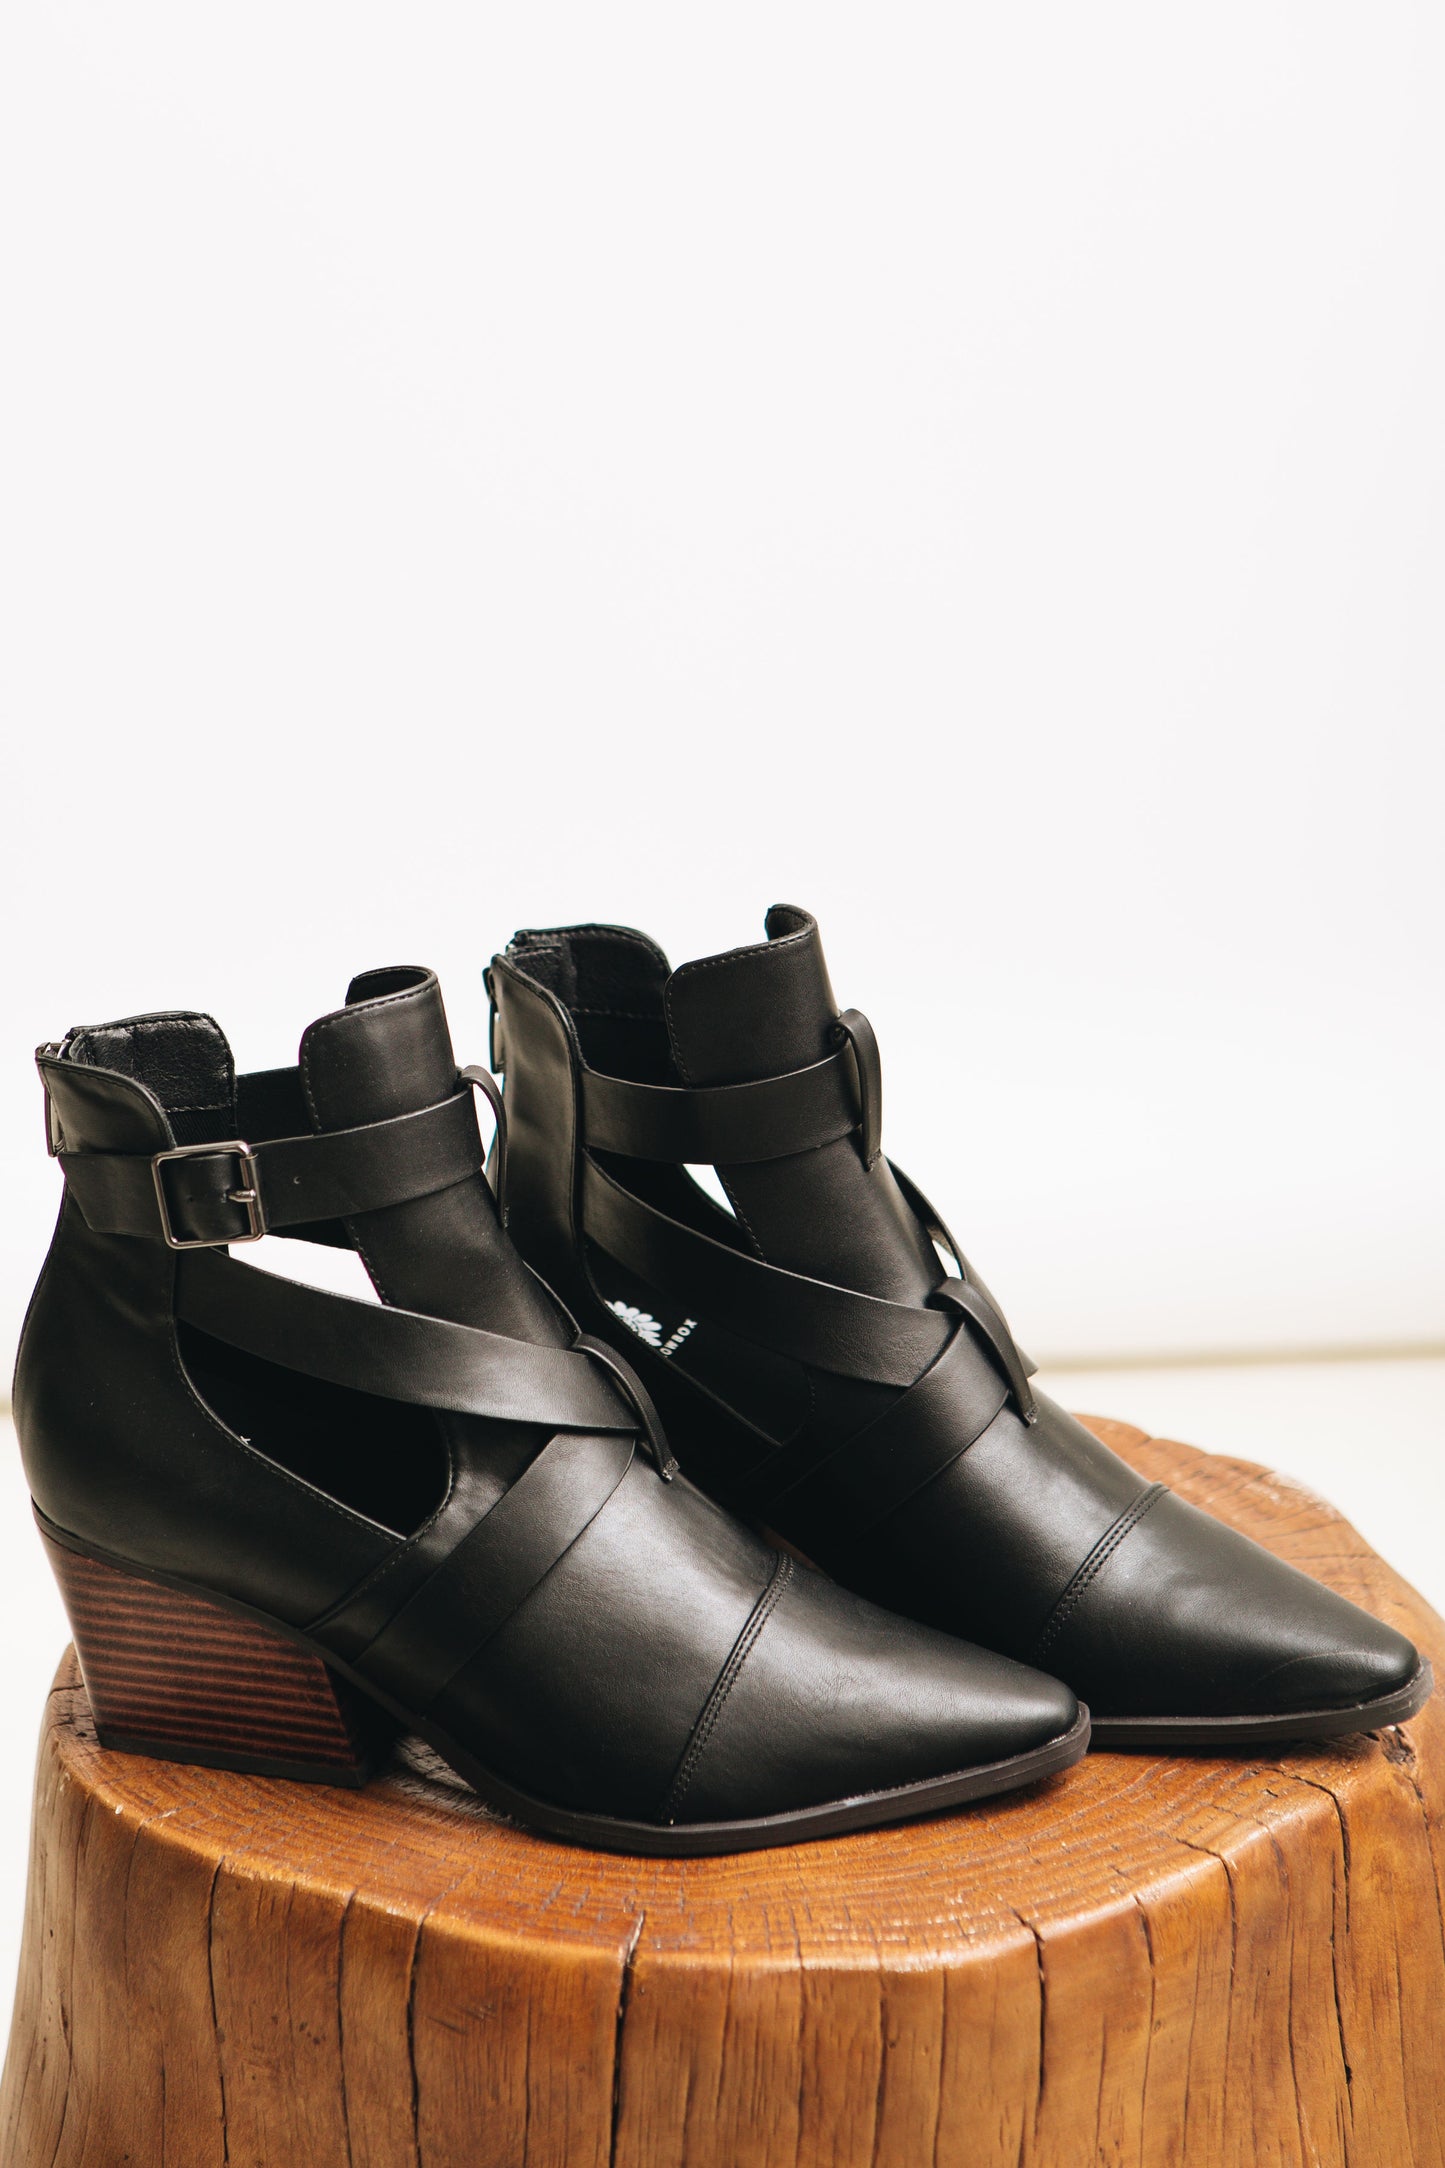 Canoly Cut-Out Bootie